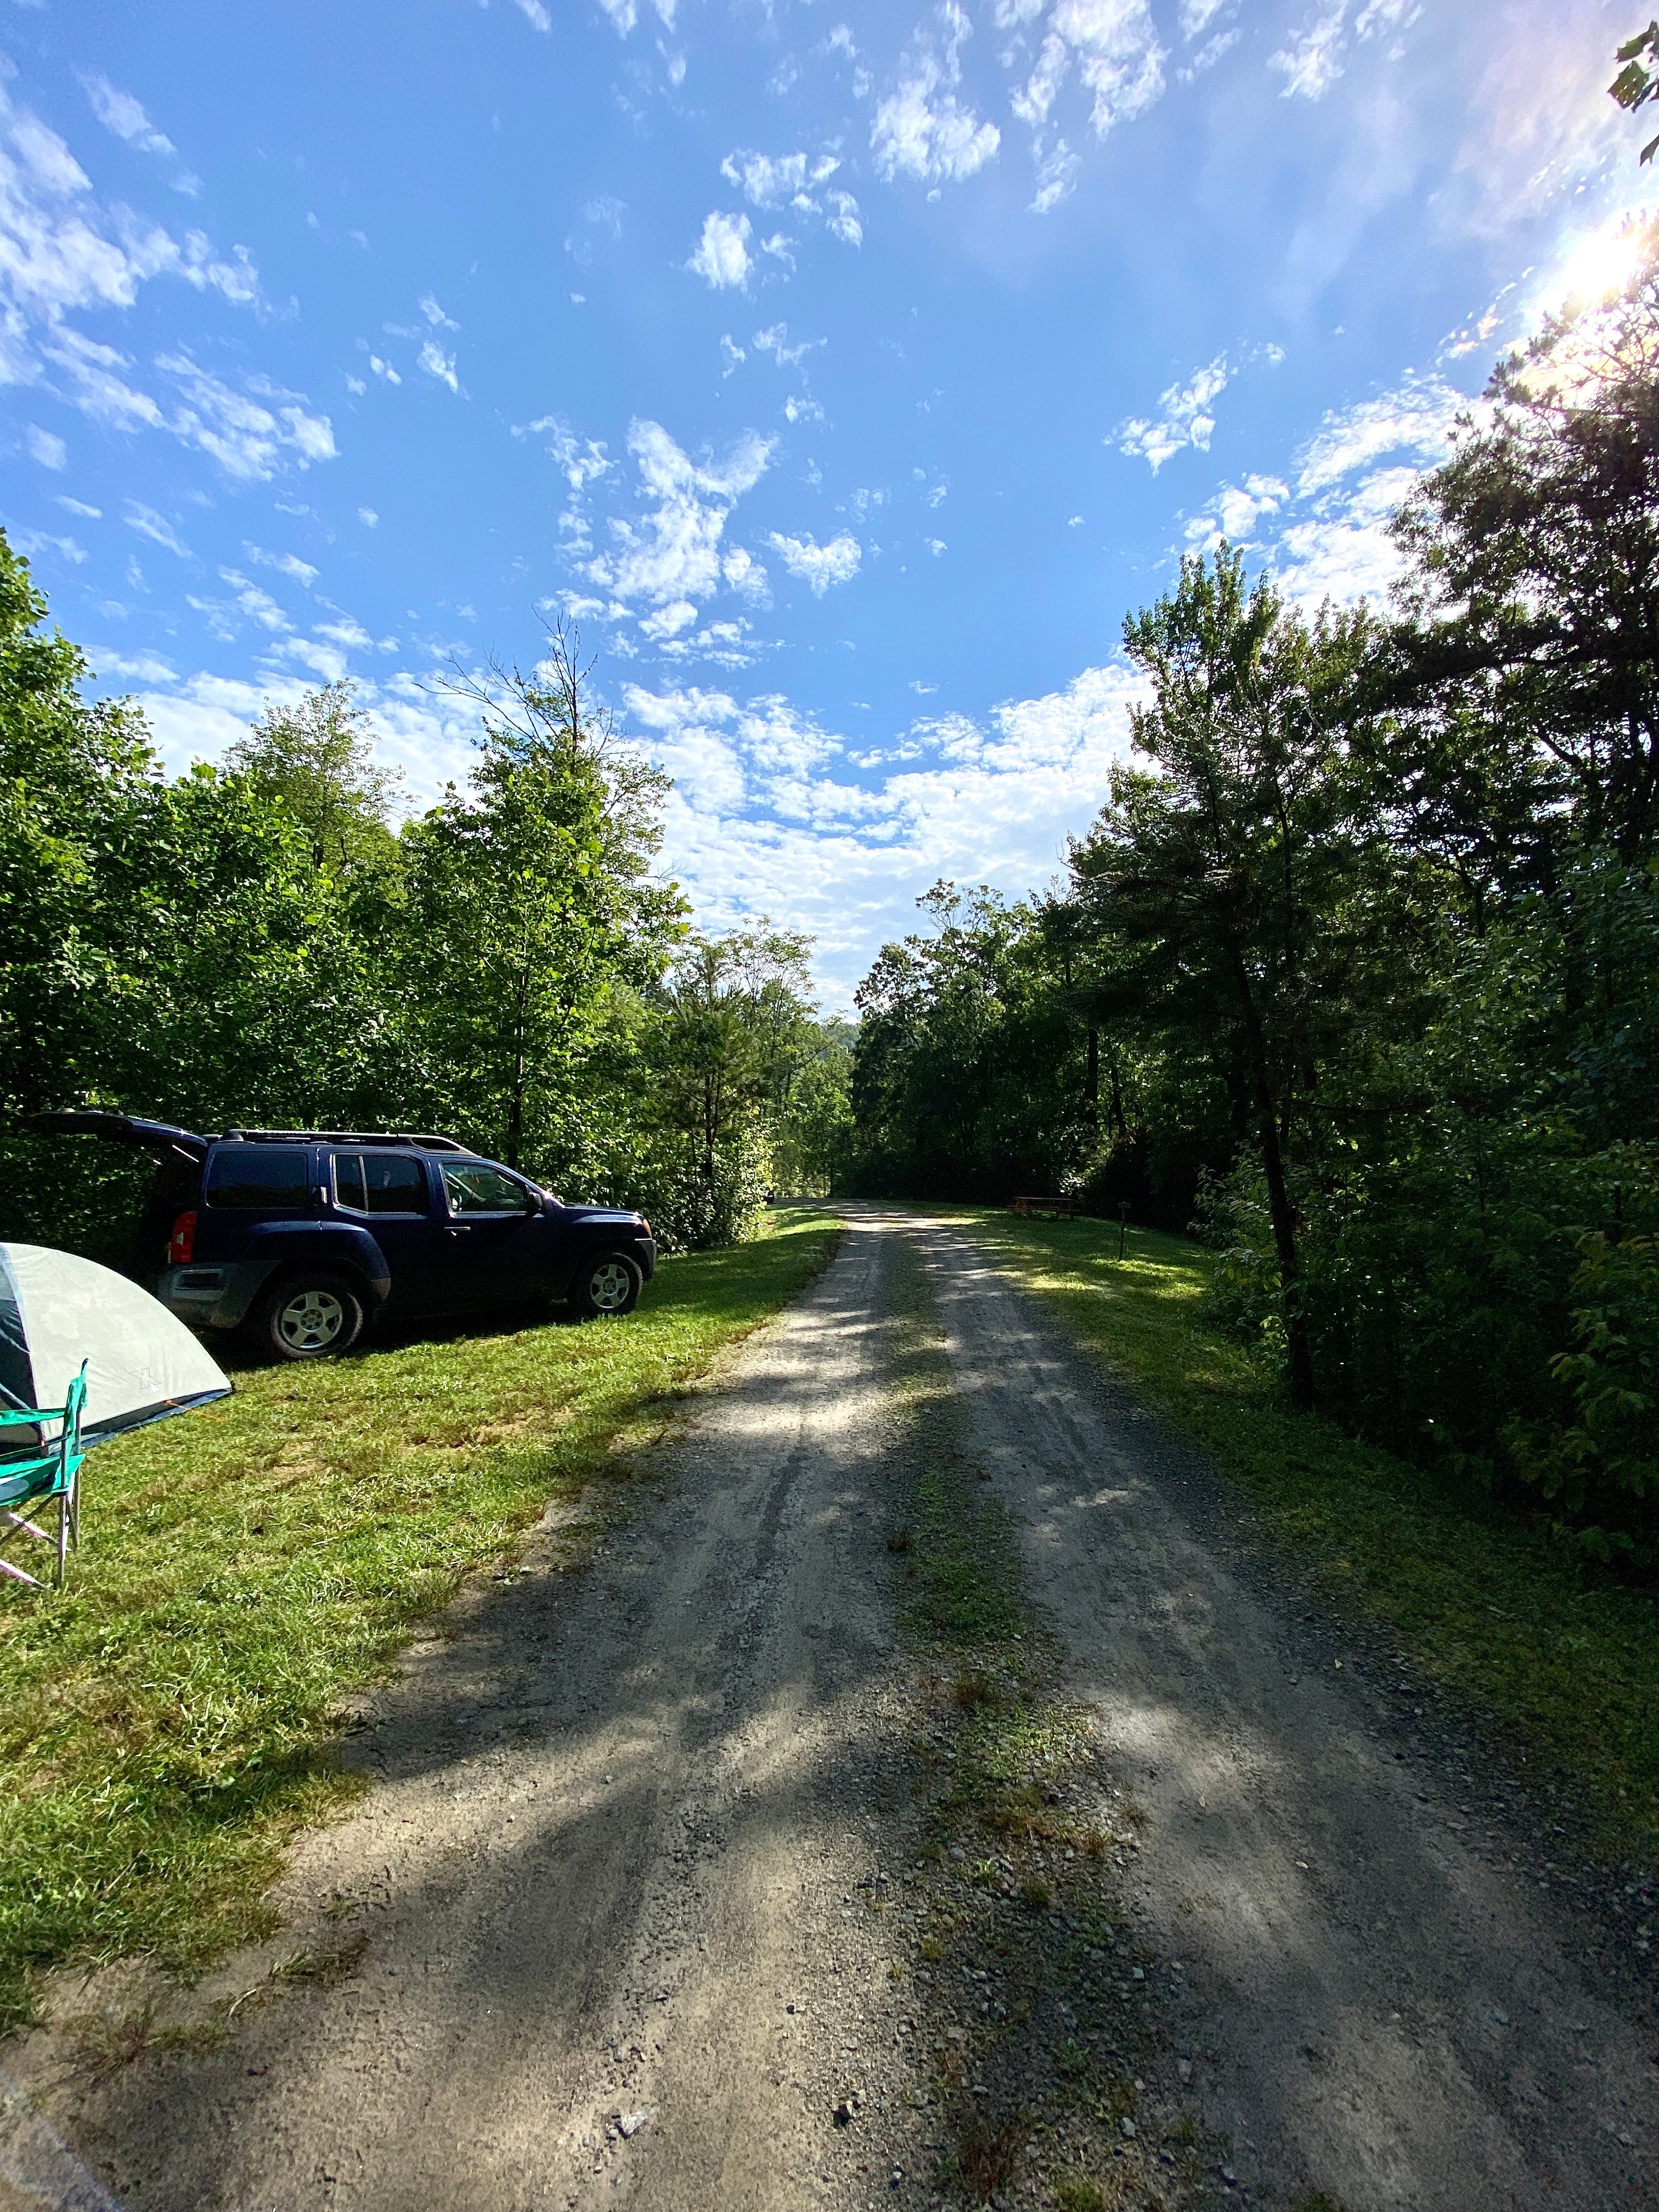 Car camping site #6 on the left.